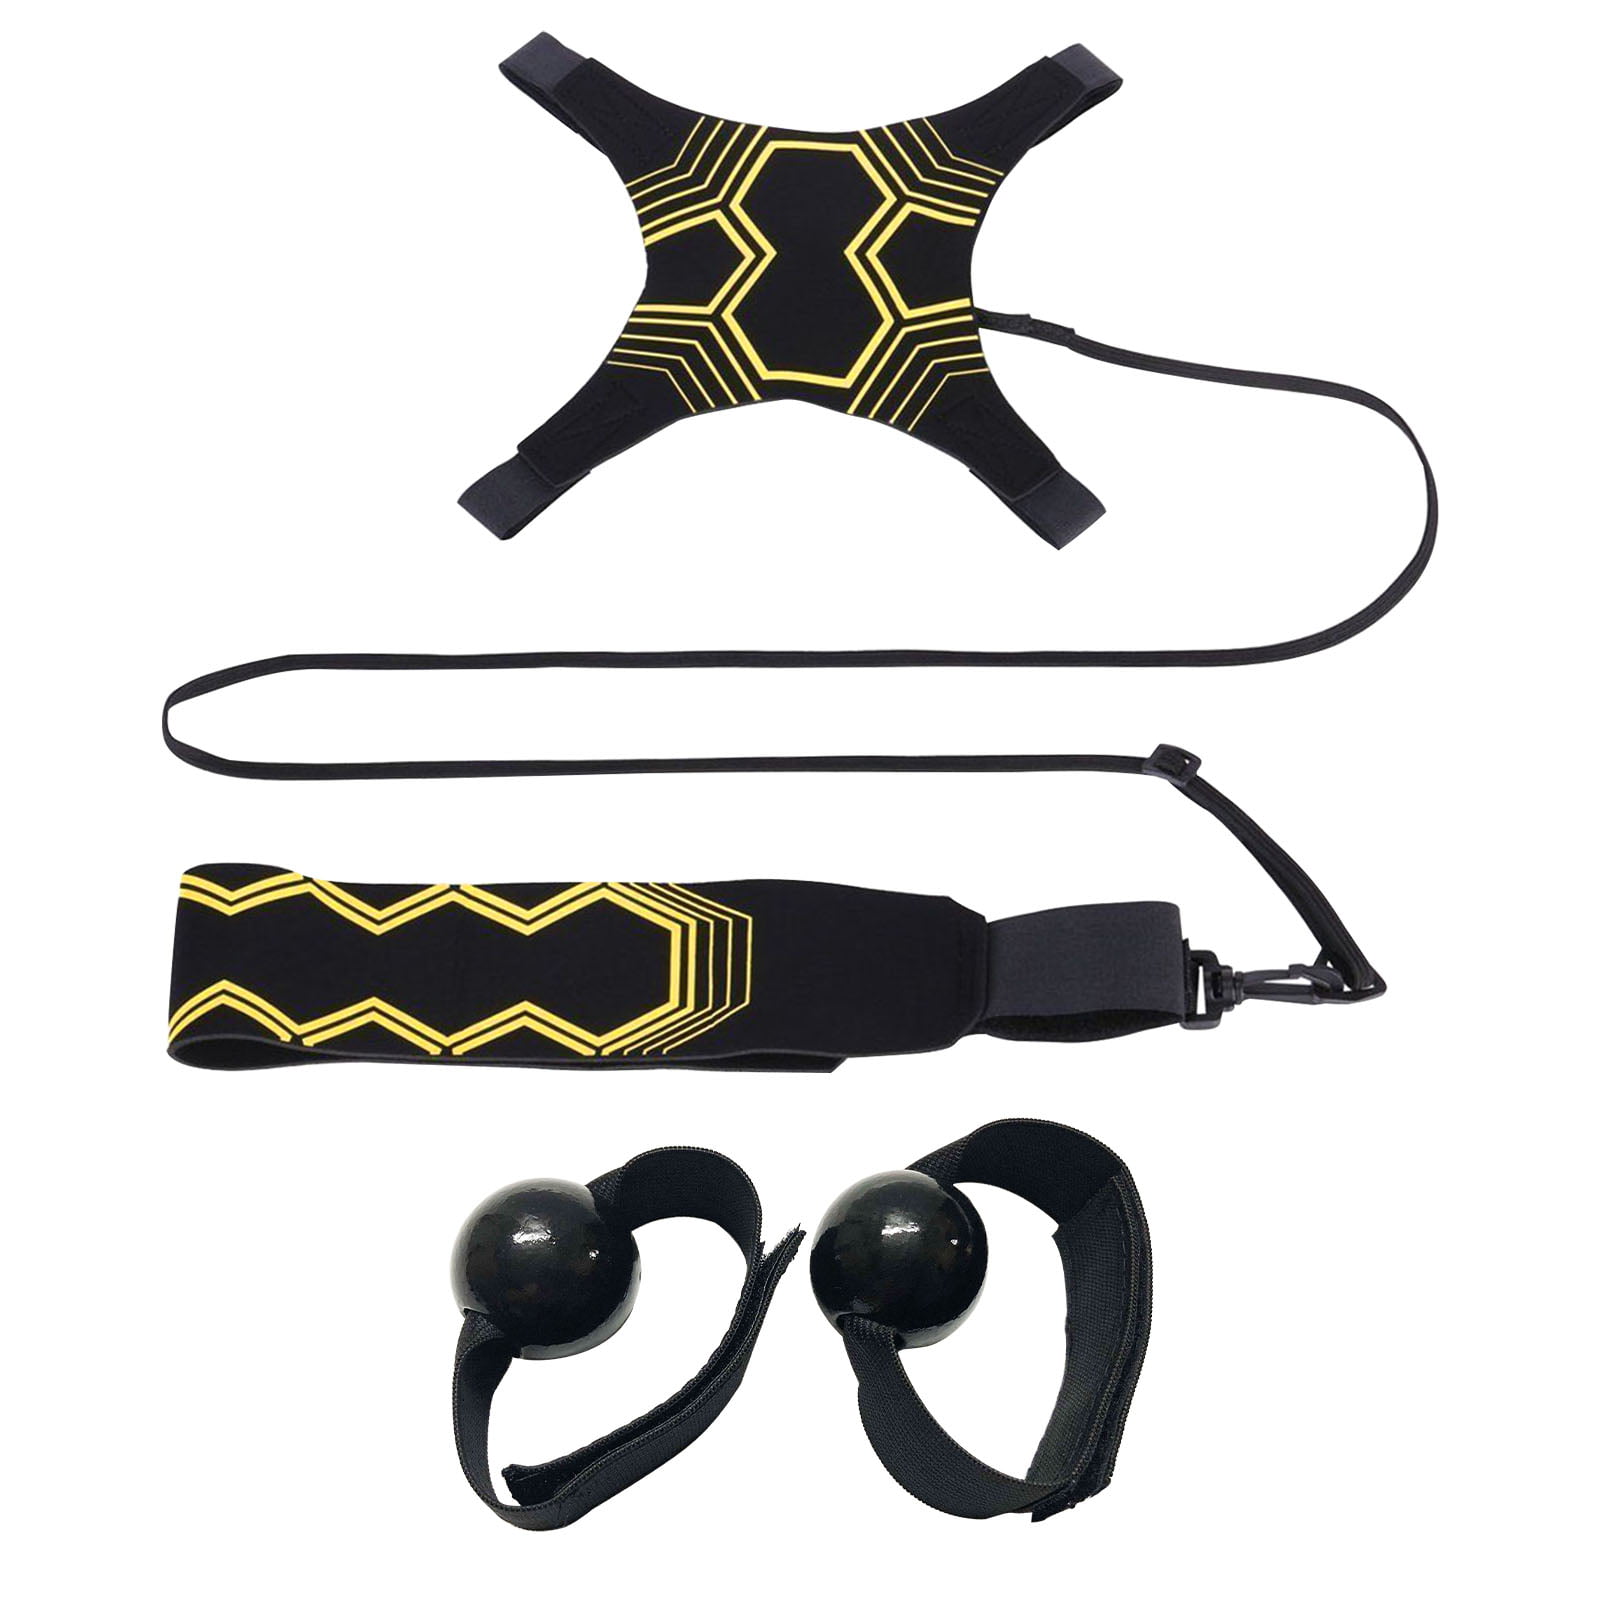 Non-Interference Solo Serve Spike and Hitting Practice Trainer with Fingers Braces & Wrist Sleeves for Beginners & Experts Volleyball Training Equipment Aid Also for Football Training